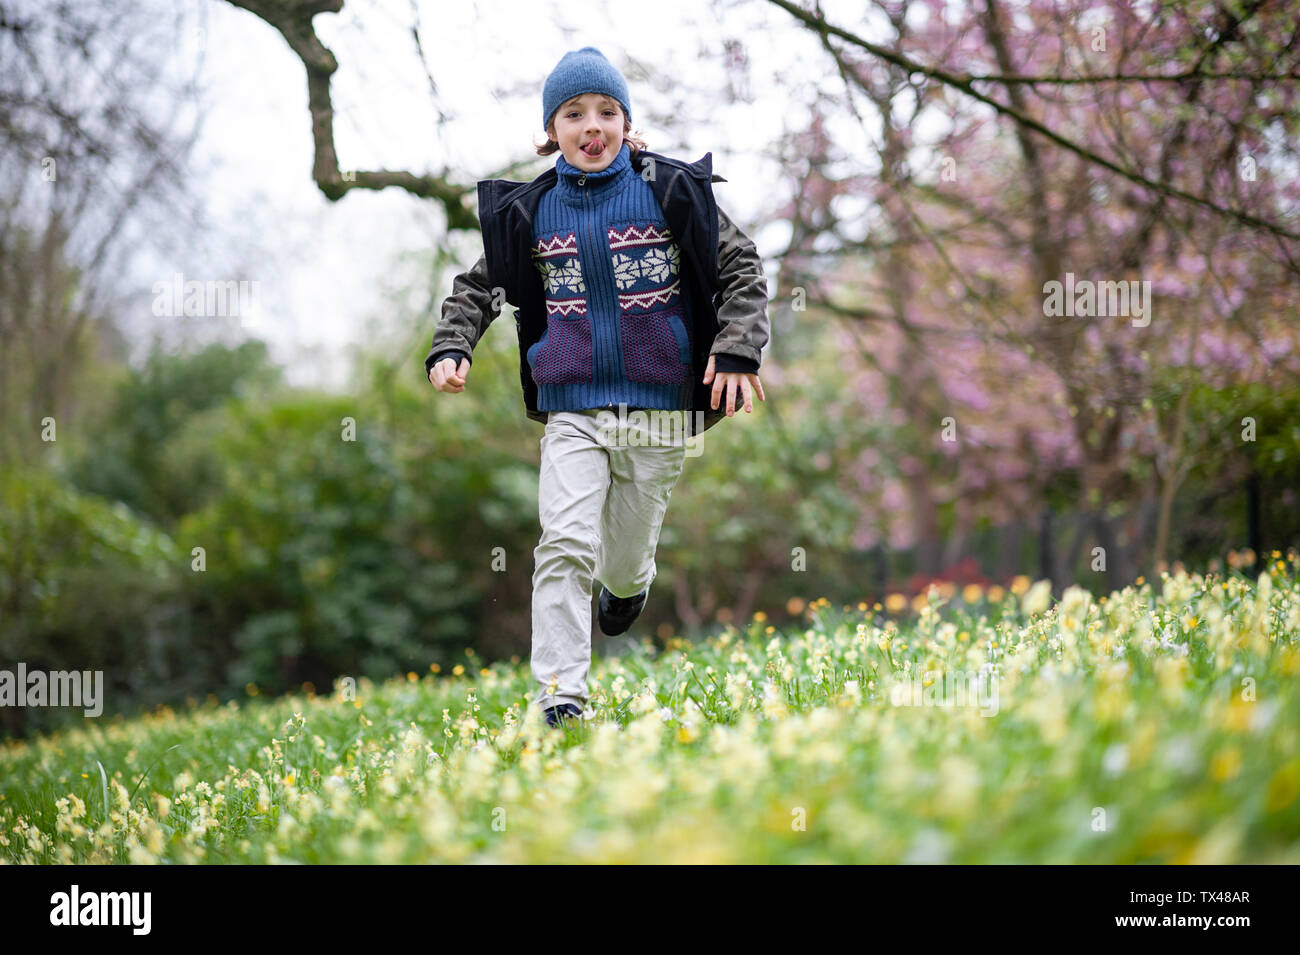 Portrait of boy running on flower meadow sticking out tongue Banque D'Images